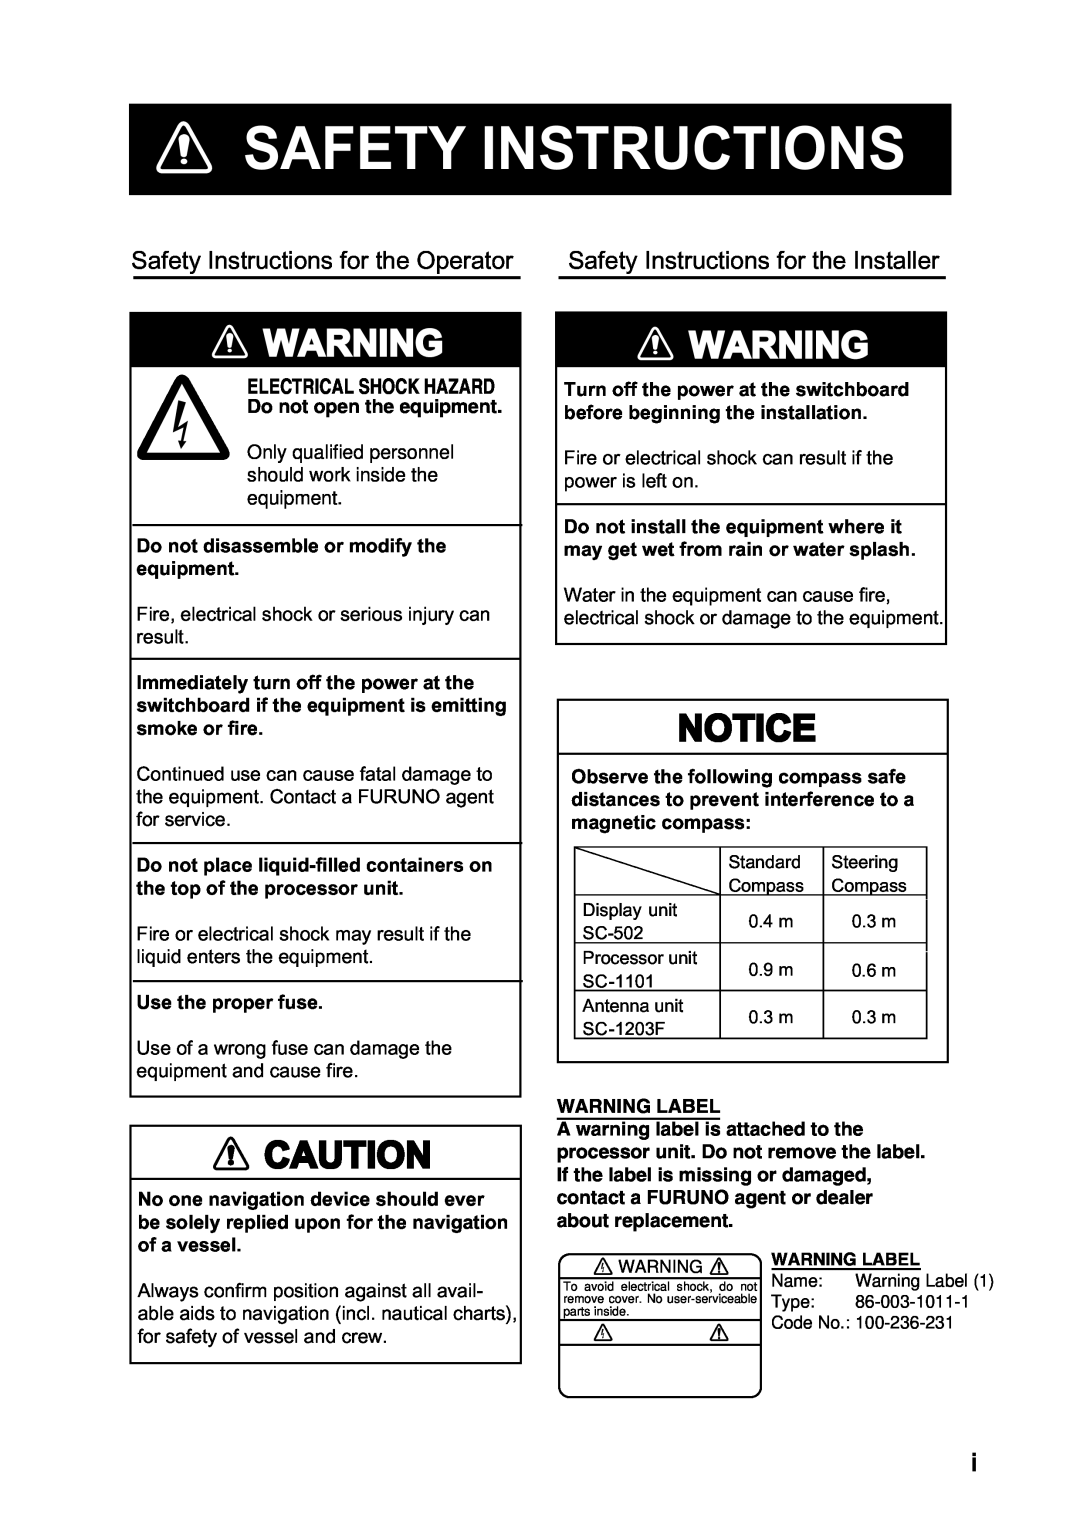 Furuno SC-110 manual Safety Instructions for the Operator, Safety Instructions for the Installer, Electrical Shock Hazard 